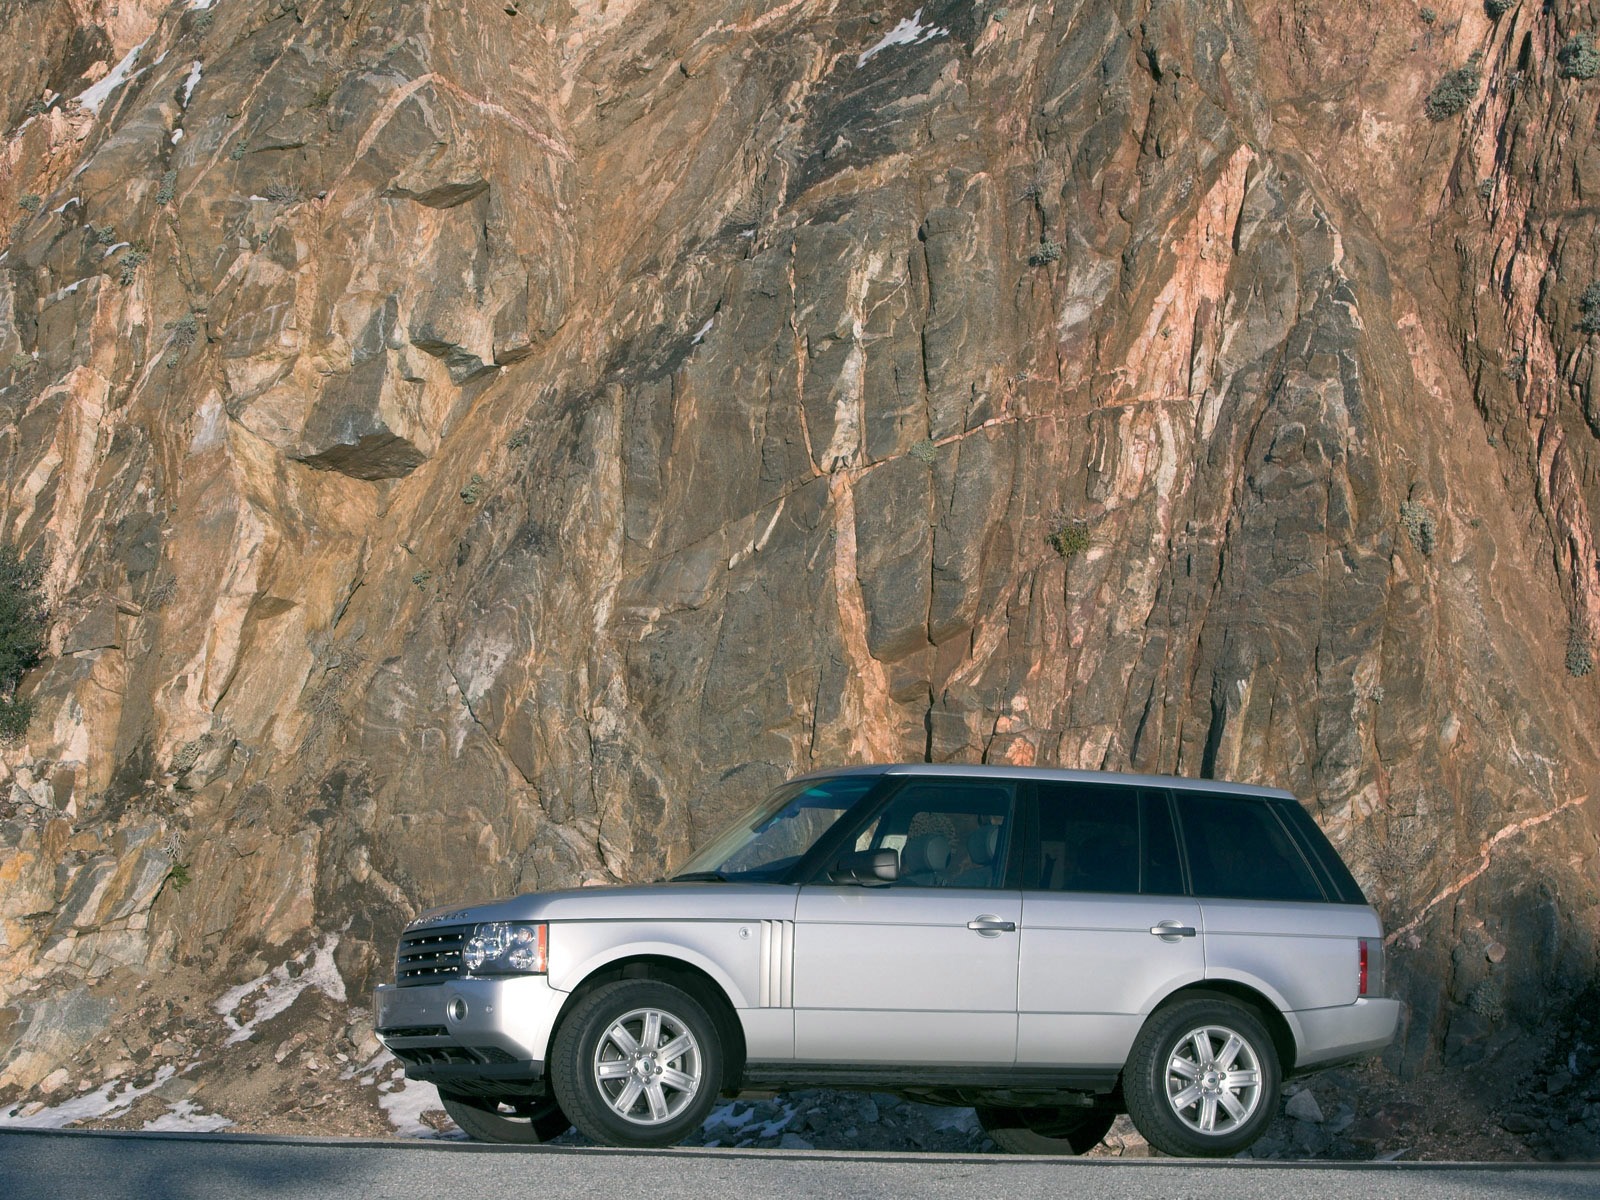 Land Rover Wallpapers Album #16 - 1600x1200